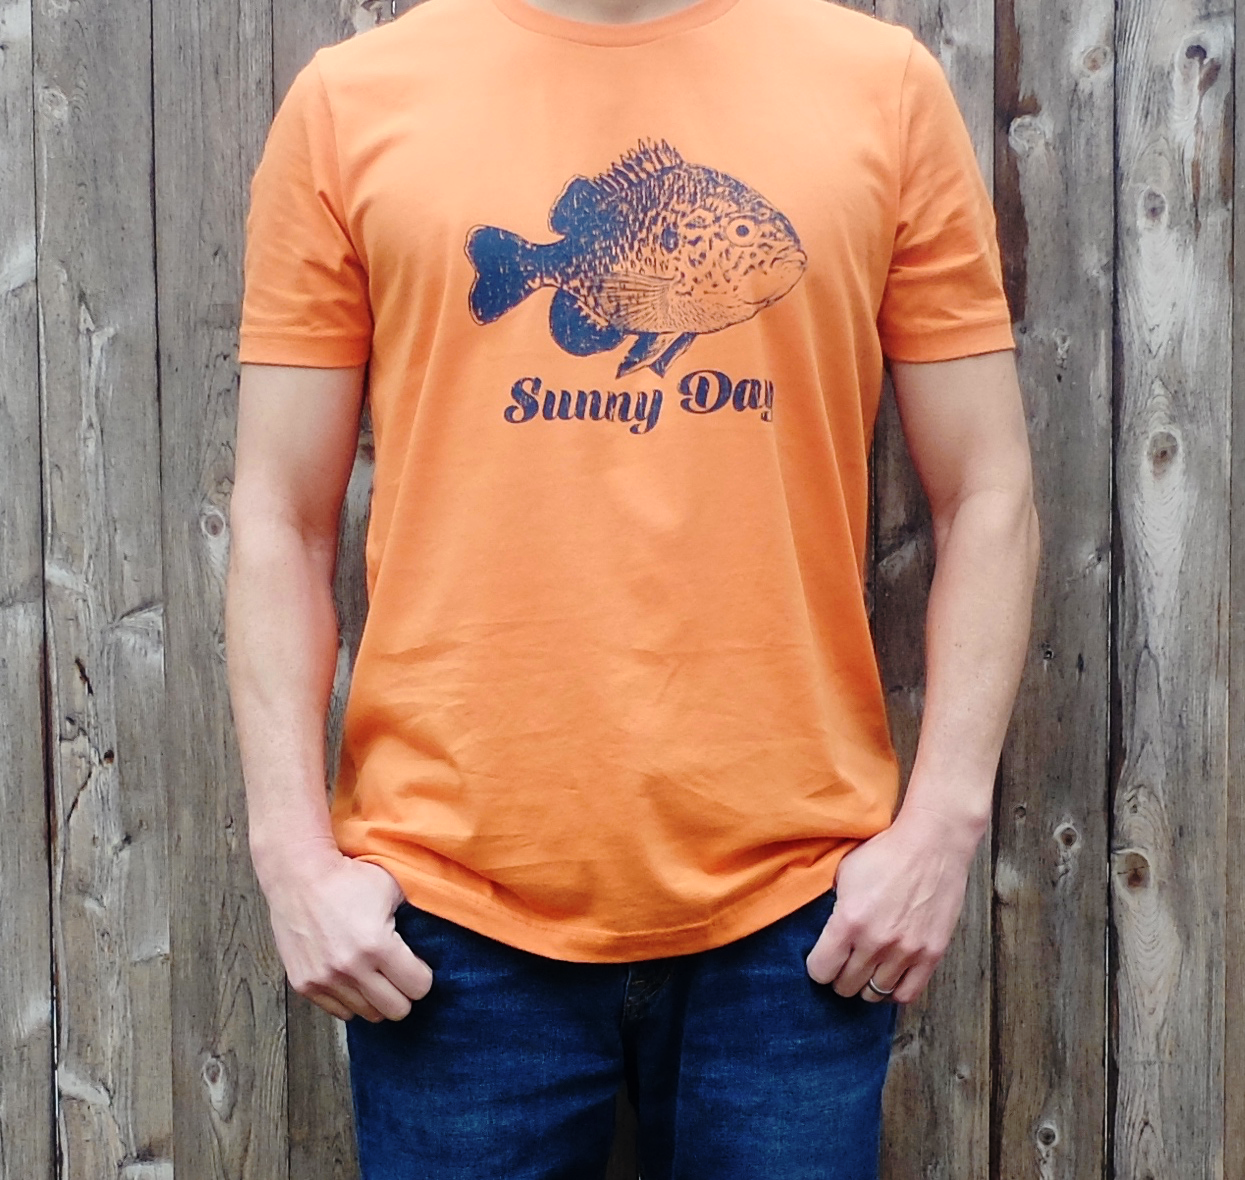 man wearing burnt orange cotton t-shirt with navy colored bluegill and Sunny Day text